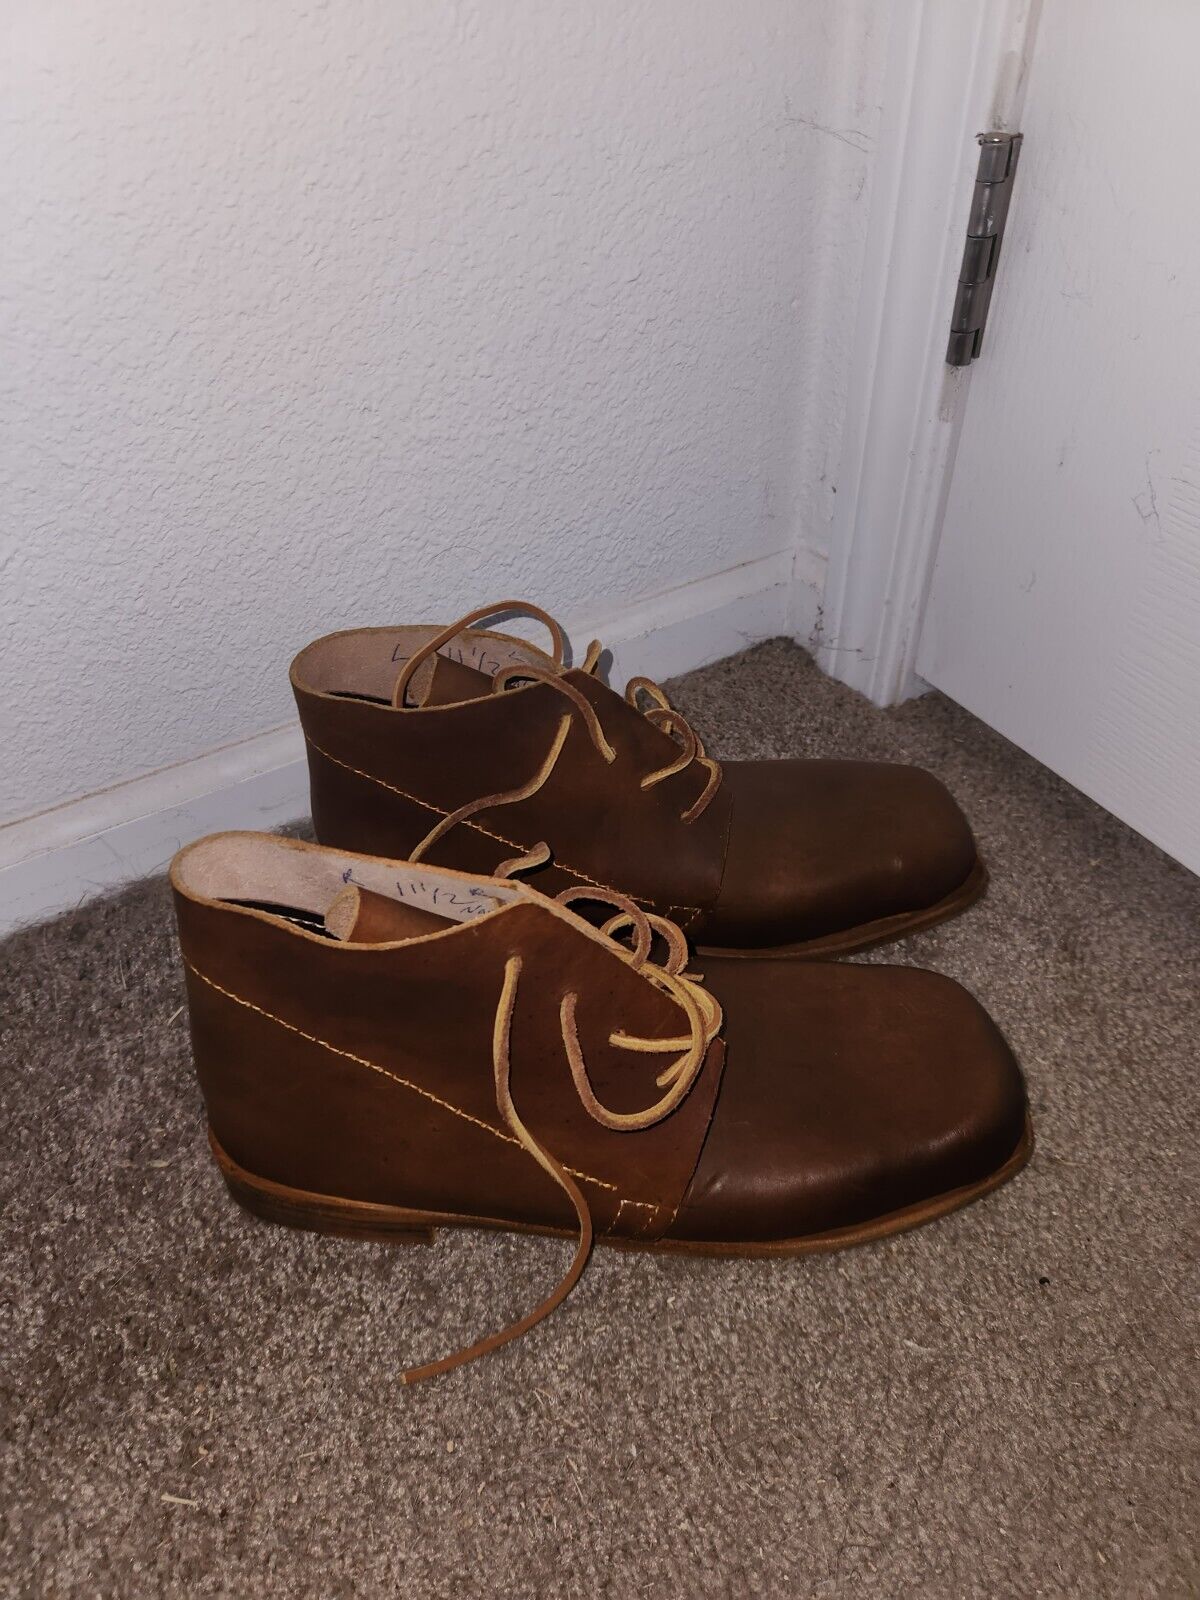 Confederate Dress Brogans. Brown Leather Smooth Side Out. Leather Soles. Size...